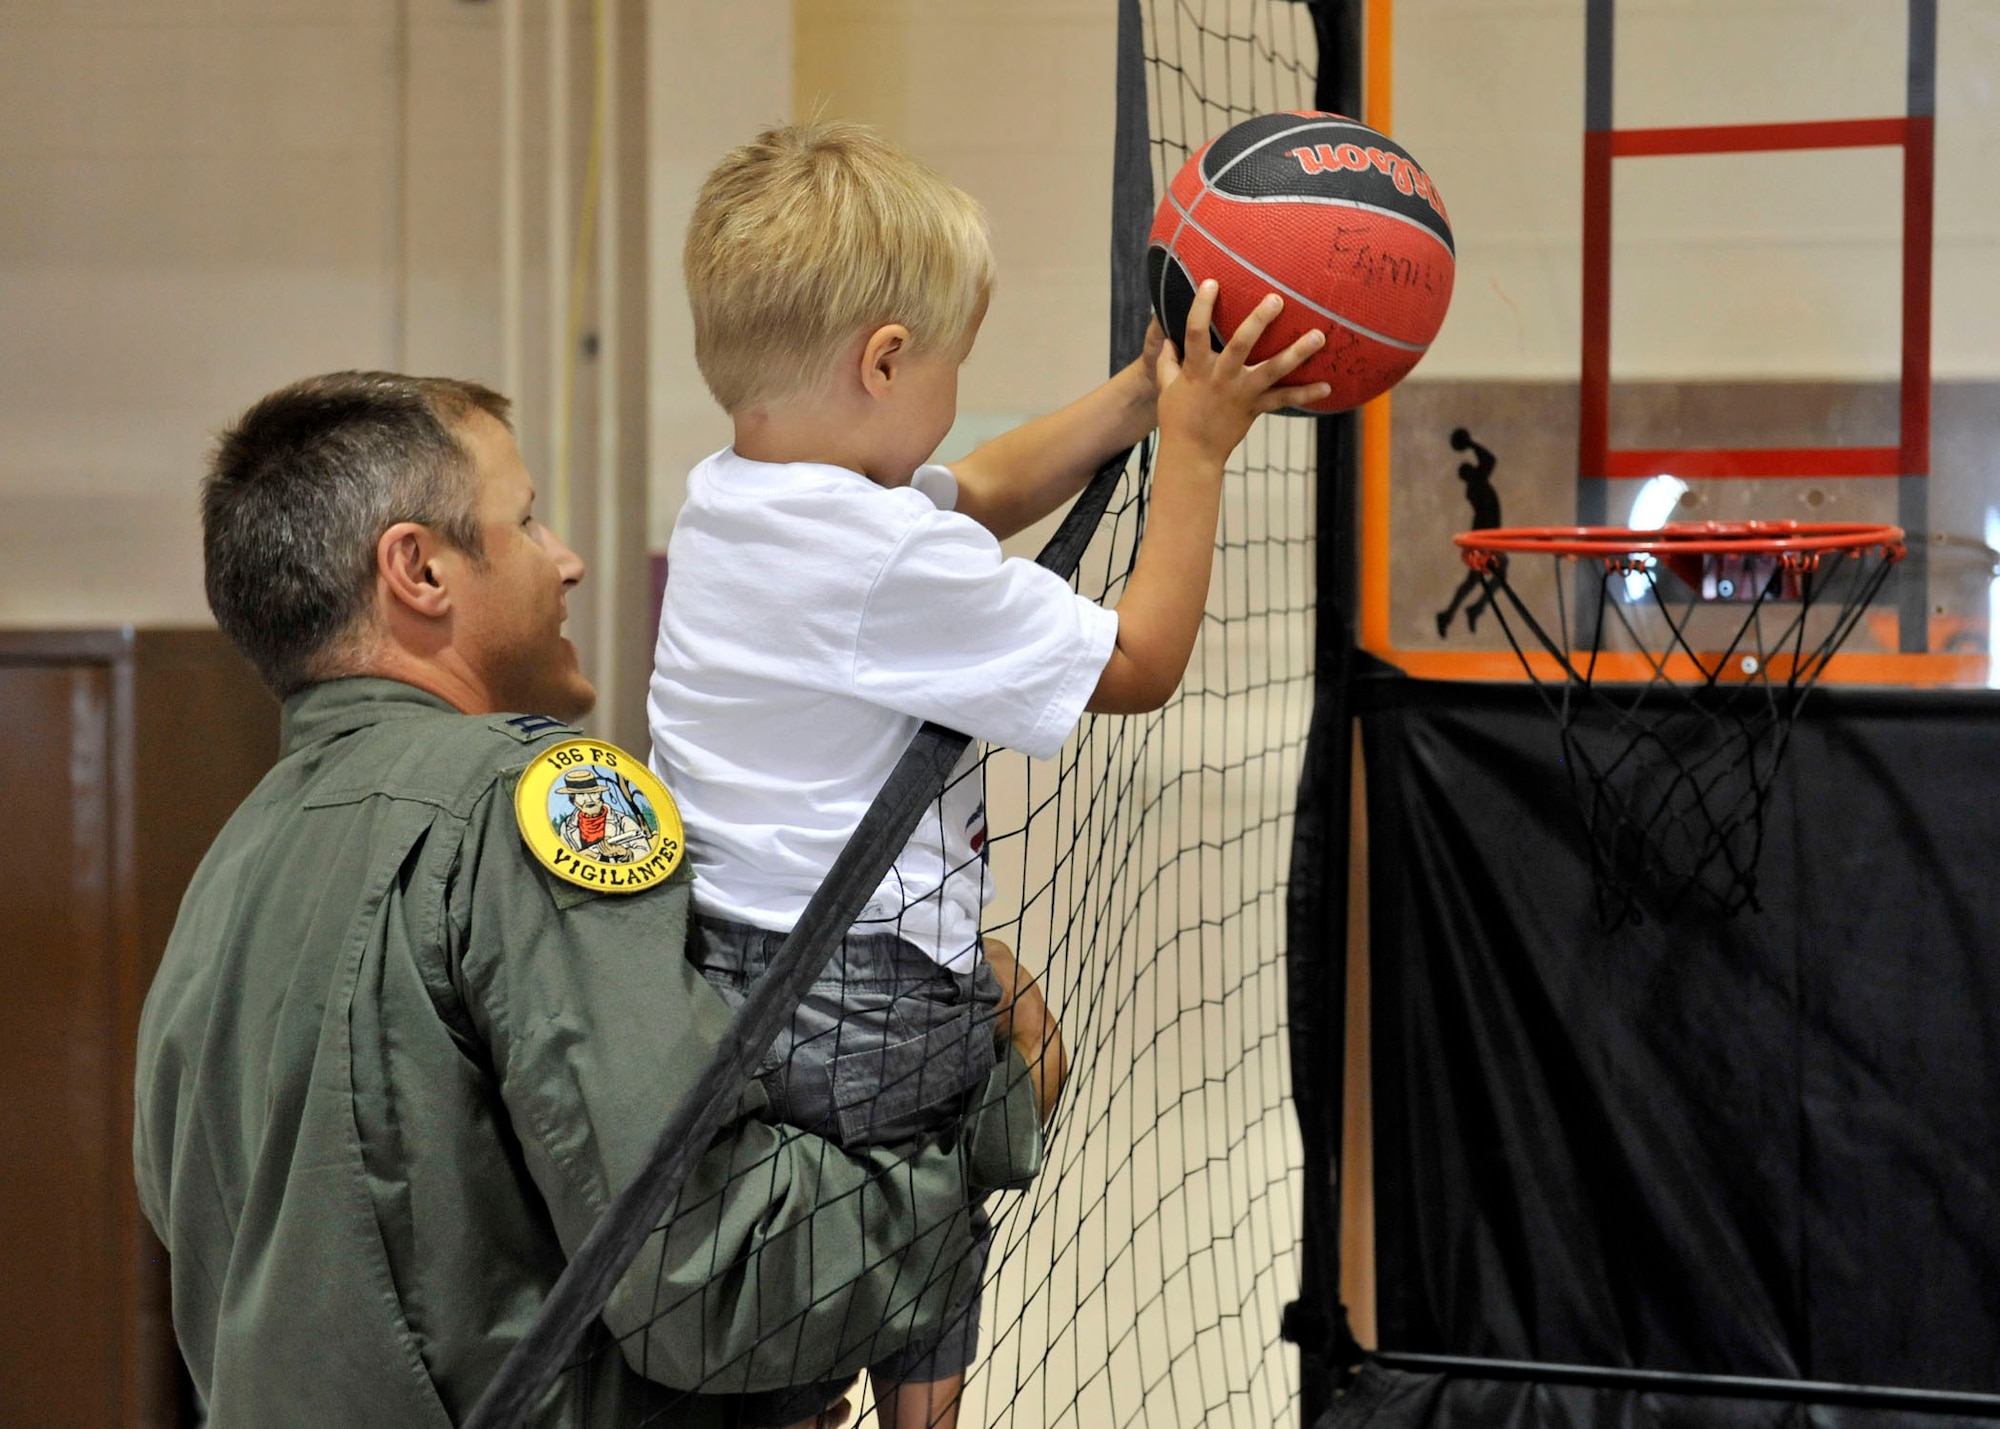 Capt. Clay Bird helps a young basketball player sink a basket during the Montana Air National Guard Family Day on Aug. 11, 2012. (U.S. Air Force photo/Staff Sgt. John Turner)